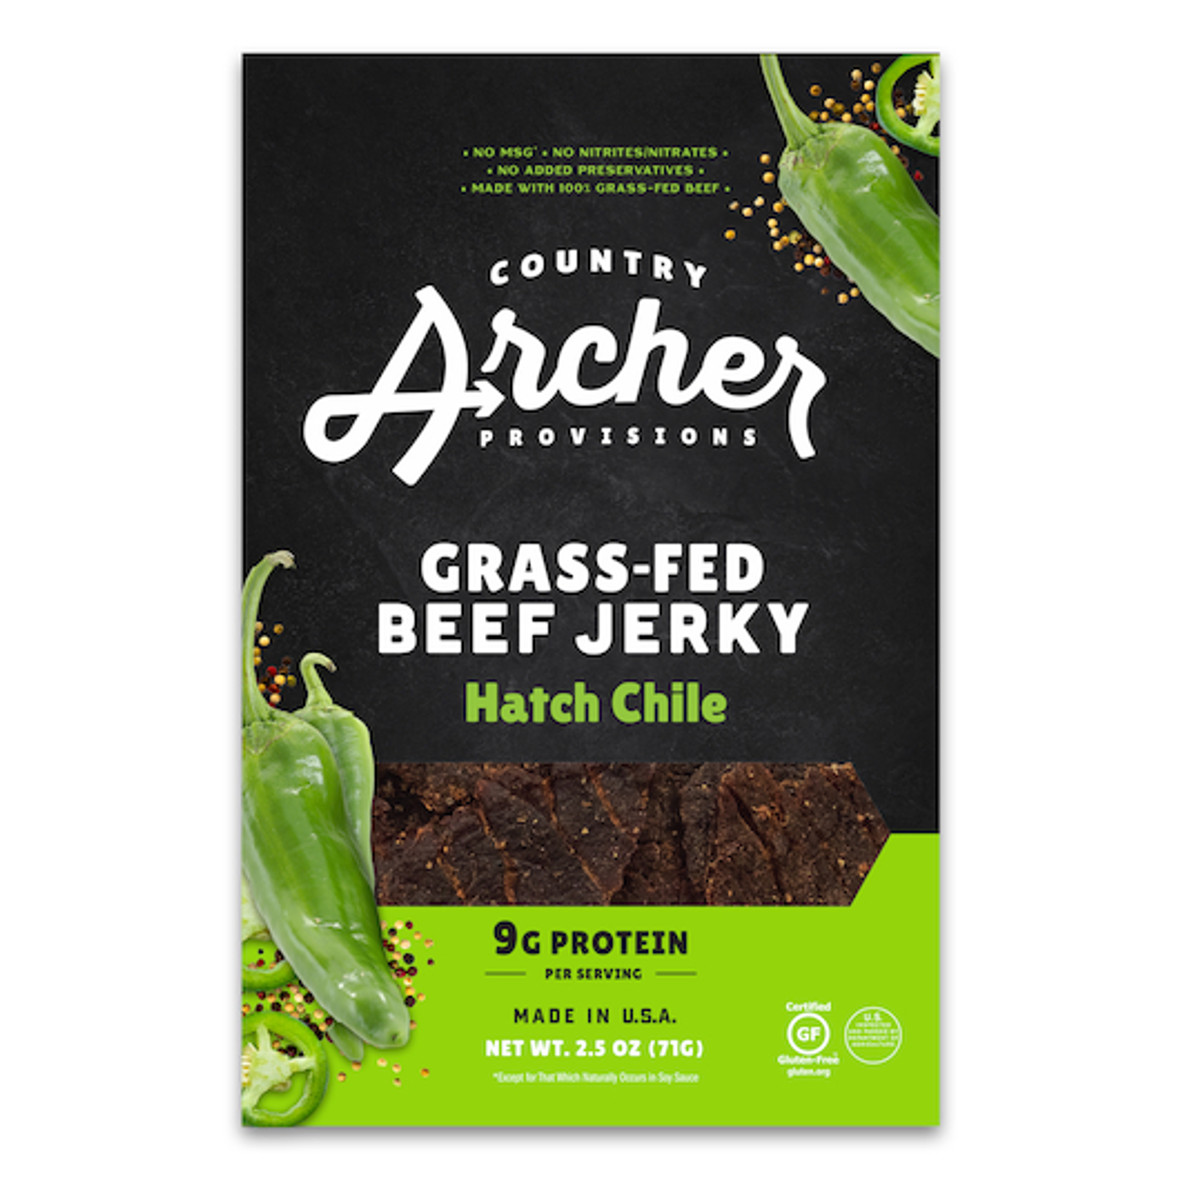 Country Archer Hatch Chile Beef Jerky, 2.5 Ounces, 12 Per Case